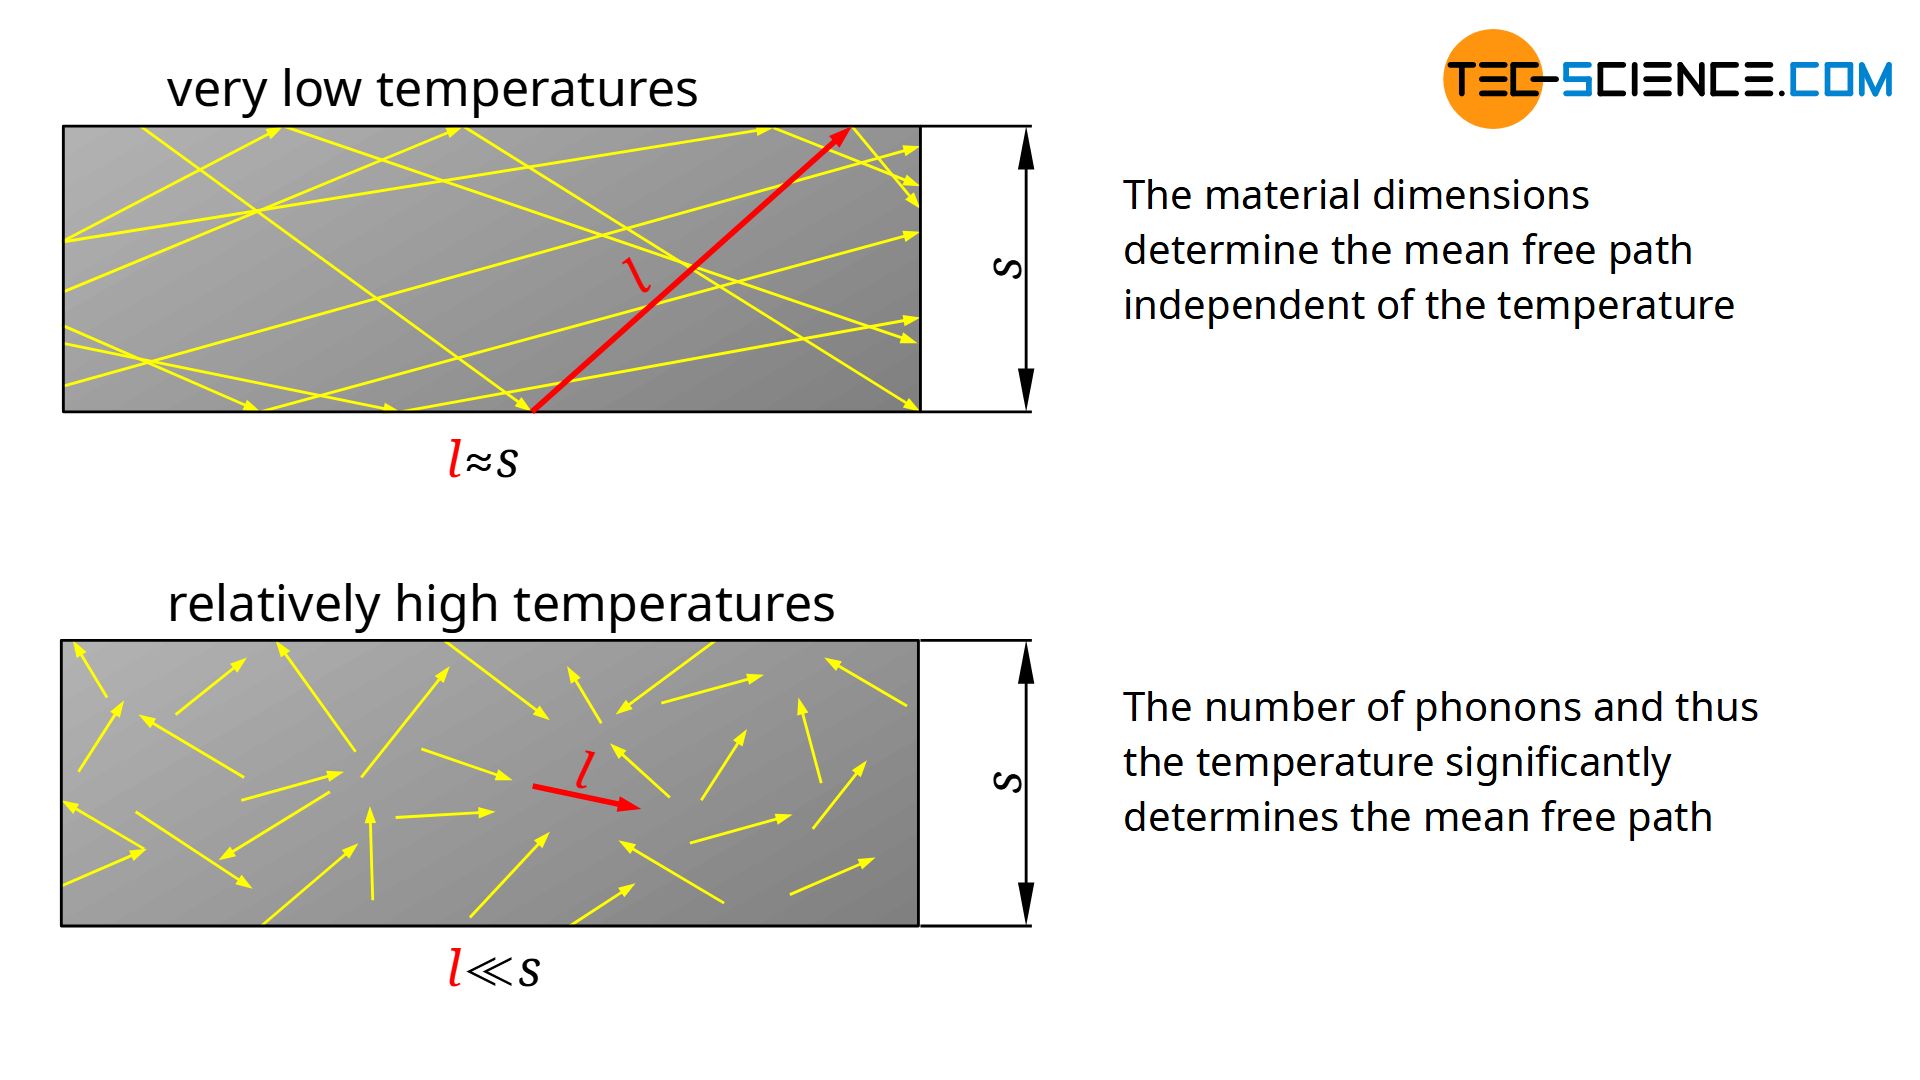 Influence of temperature on the mean free path of the phonons